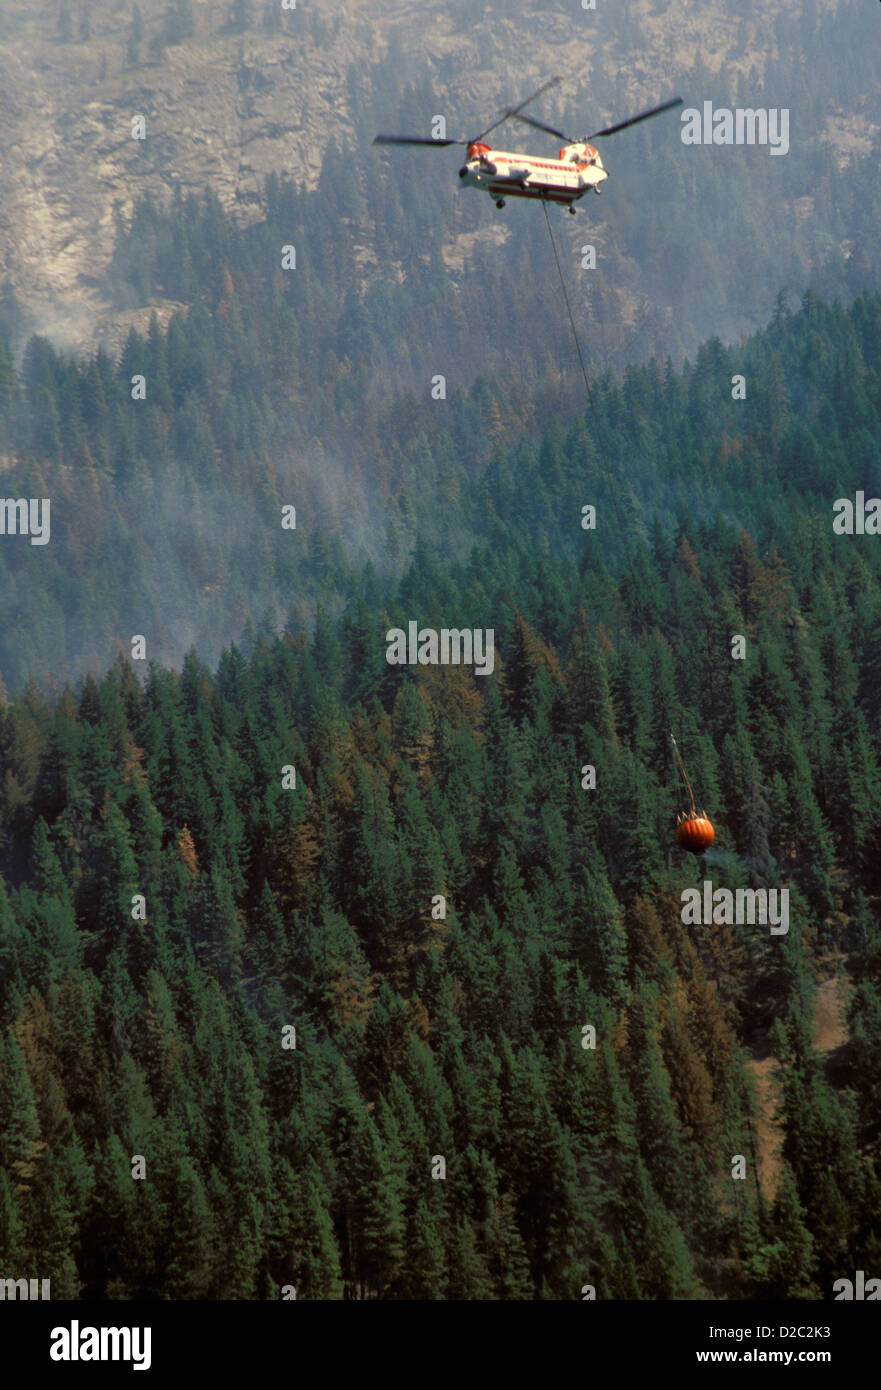 Washington Lake Chelan National Recreation Area Flick Creek Forest Fire Helicopter Carrying Water In Bambi Bucket Fight Fire. Stock Photo